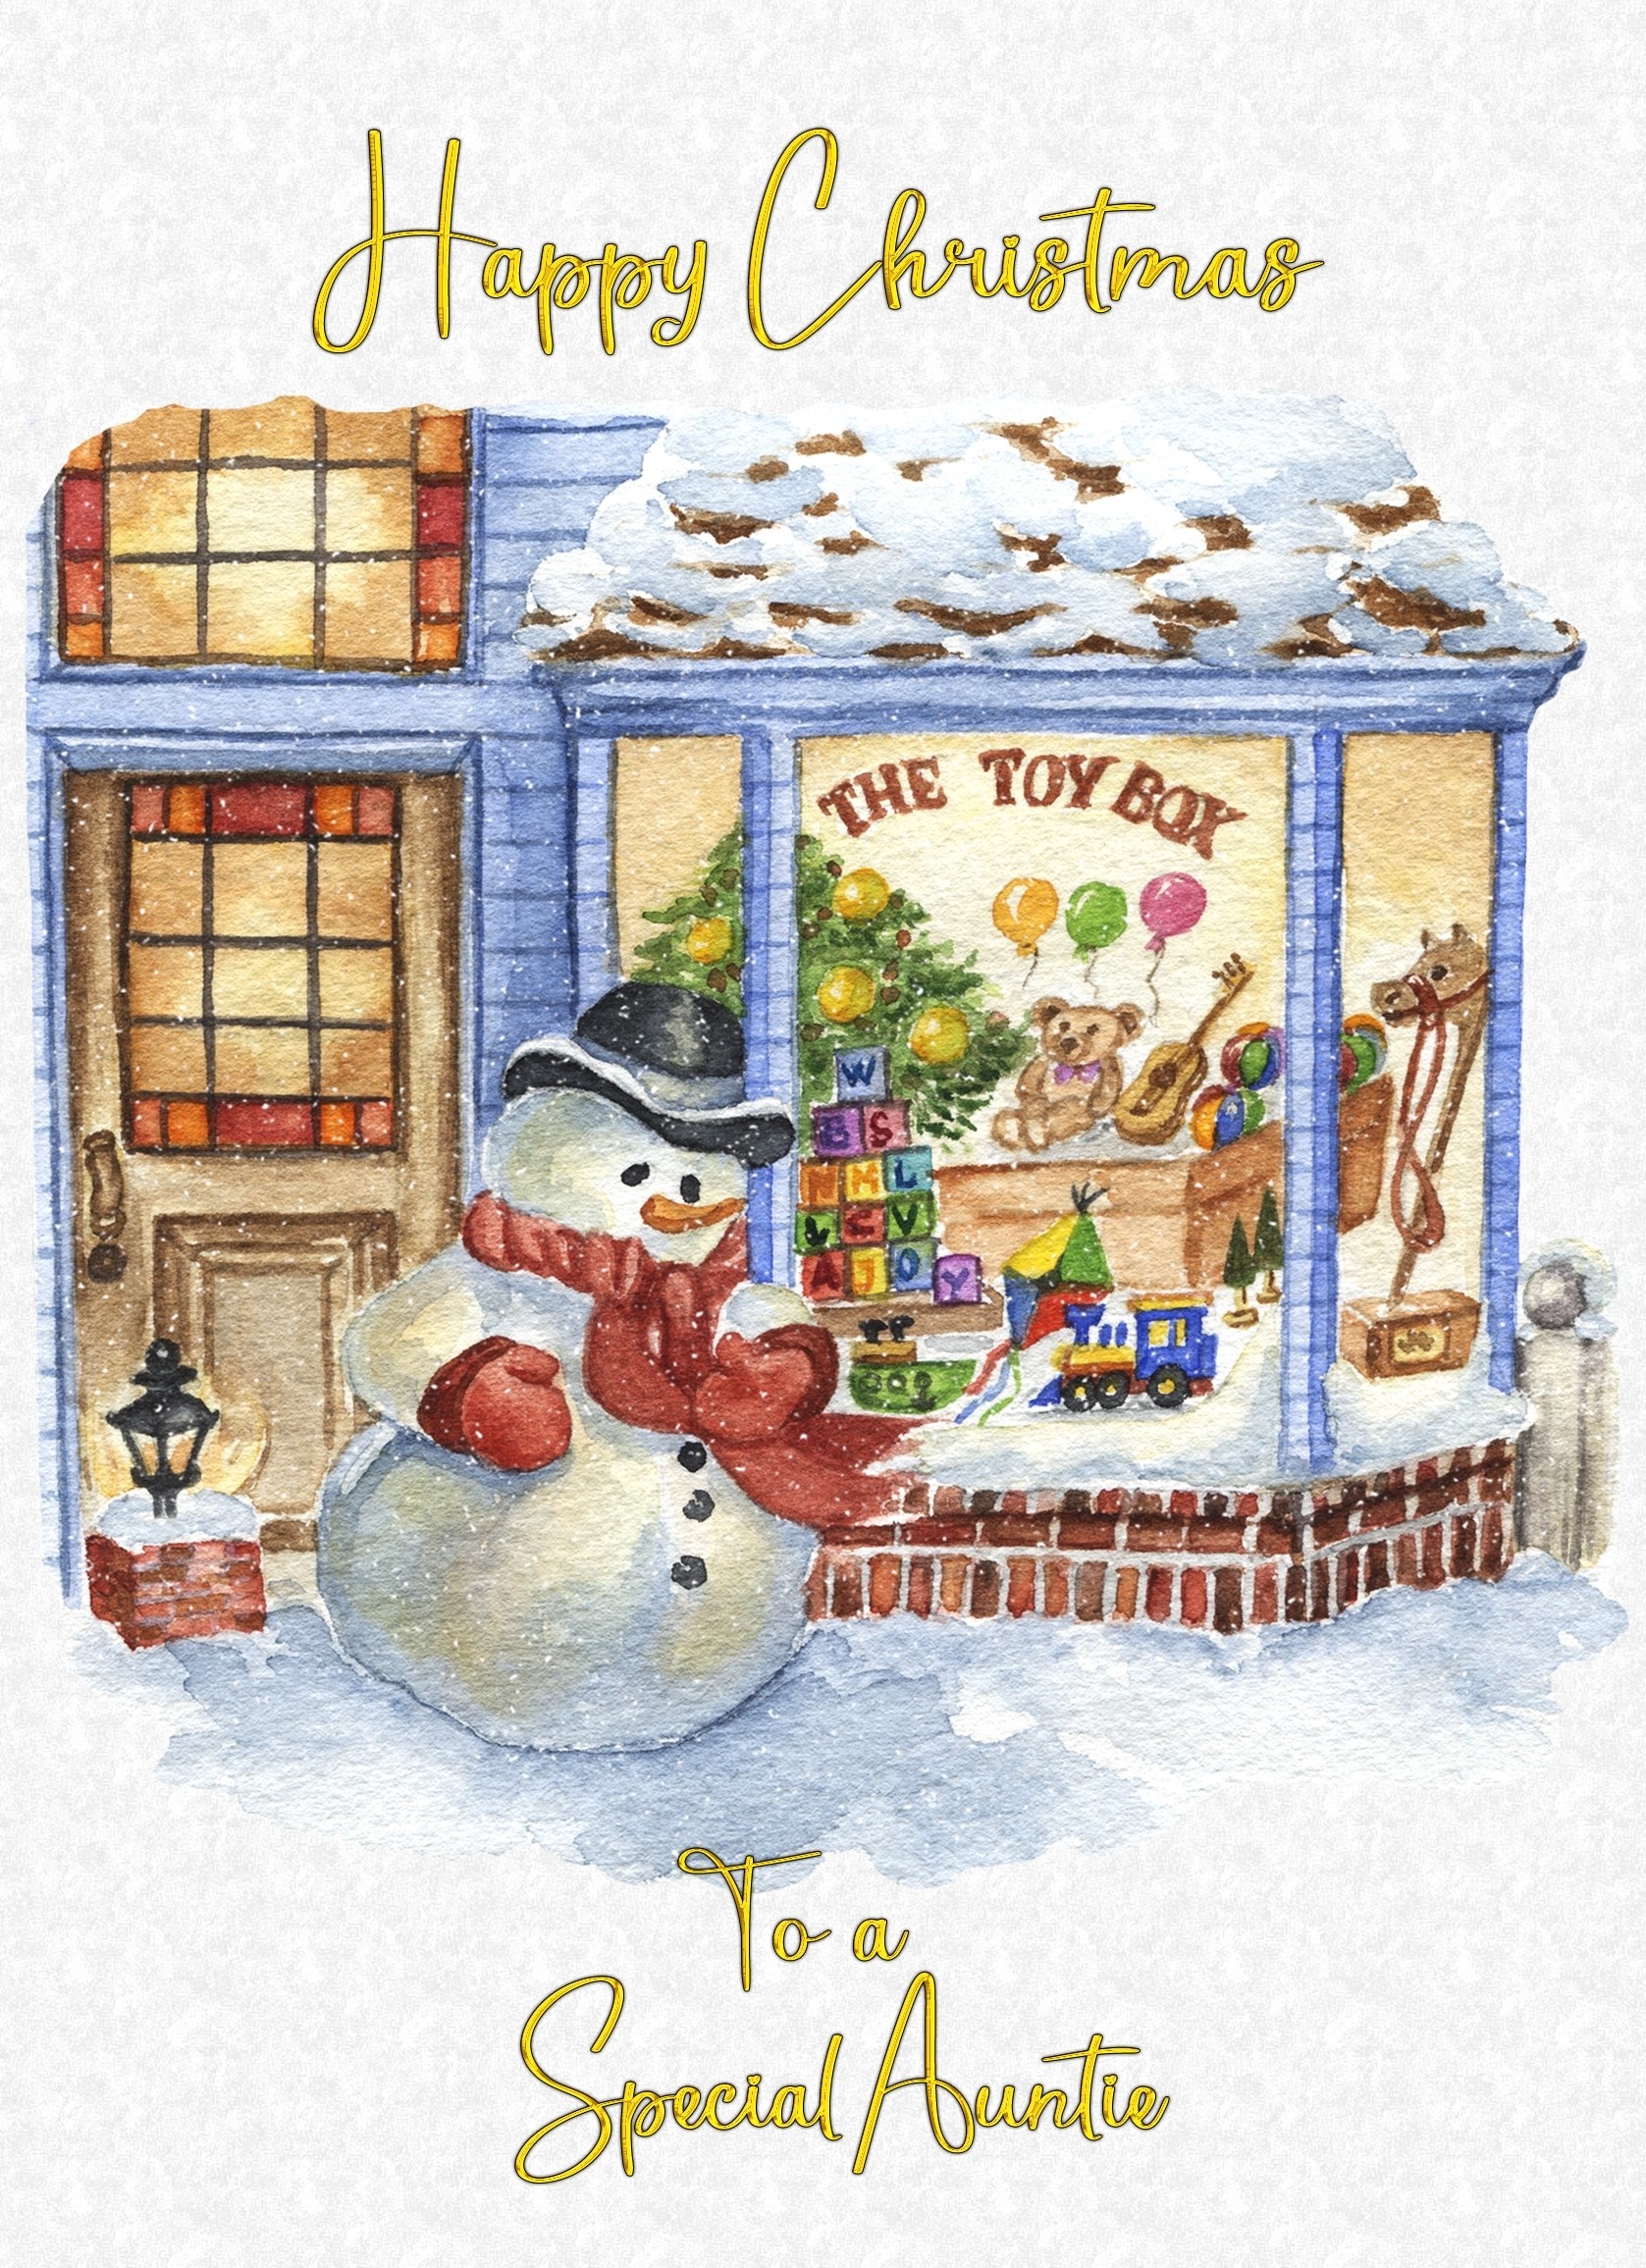 Christmas Card For Auntie (White Snowman)